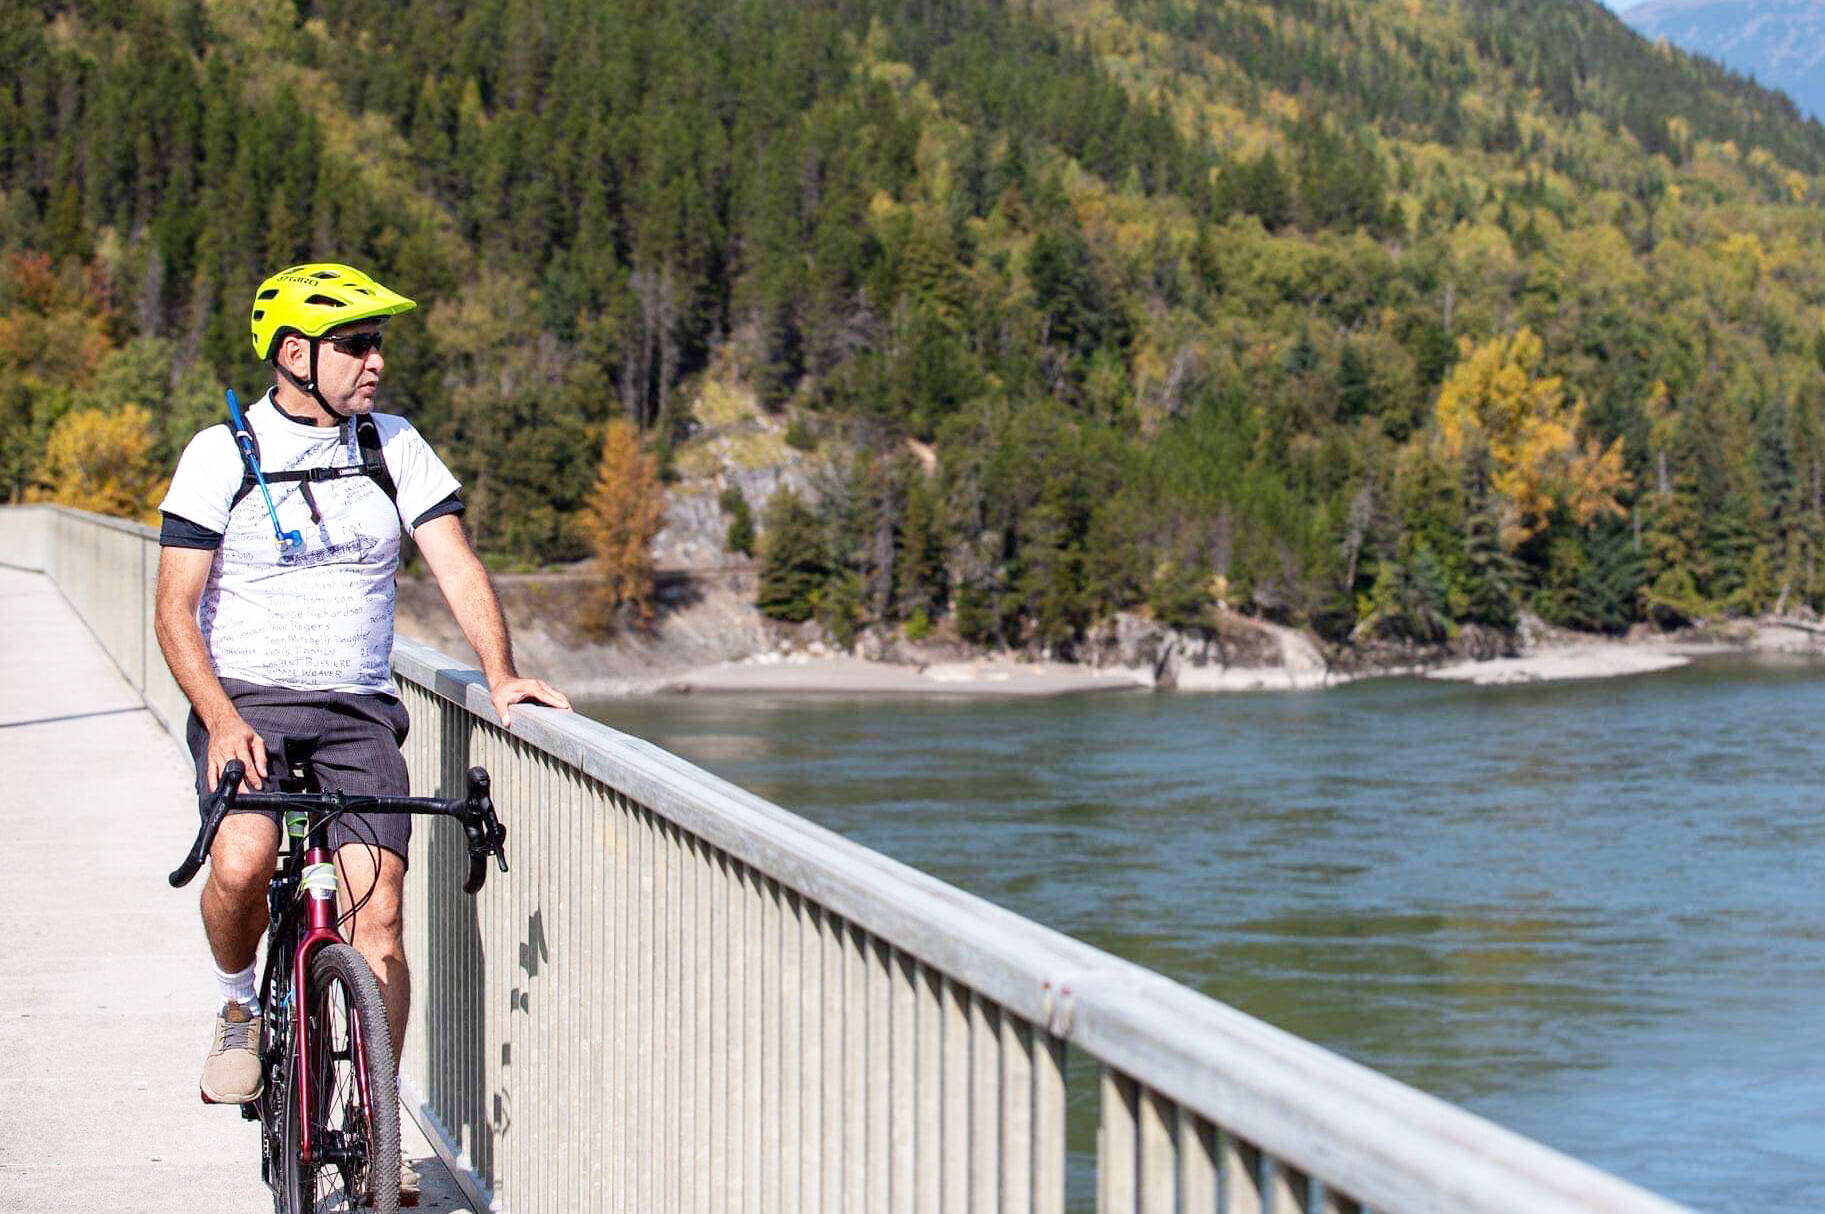 Skeena MLA Ellis Ross enjoys a bike ride on Sept. 16, 2020. Almost a year later, a cycling accident would result in short-term memory loss, prompting him to seek community support to recall recent events. (Peter Versteege photo)